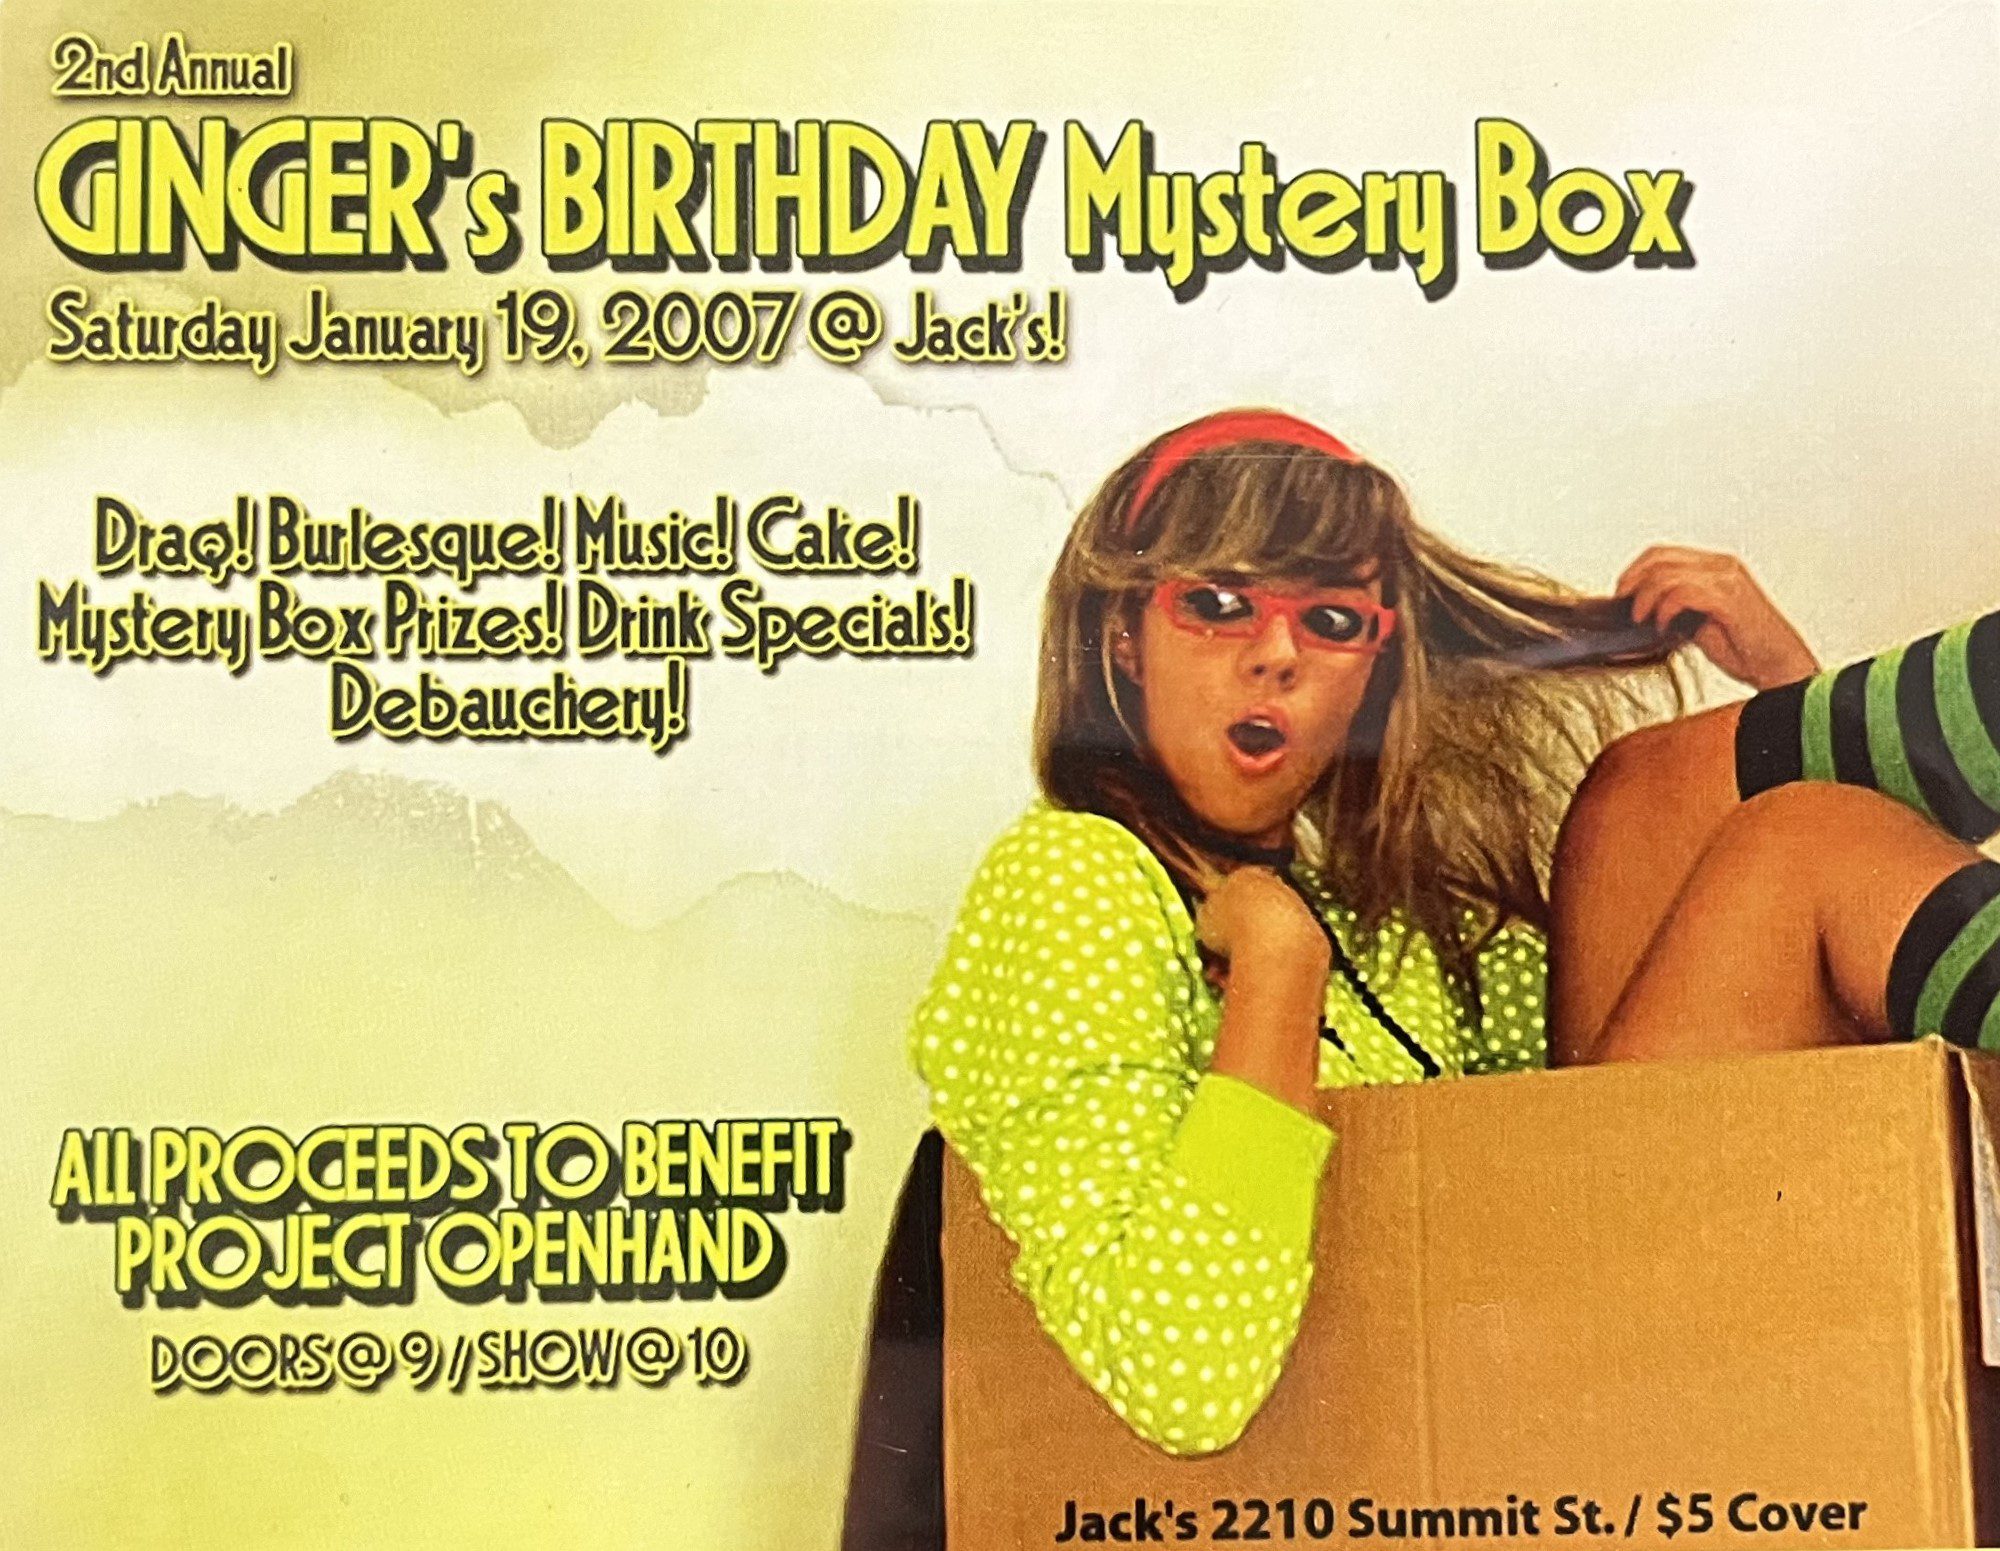 Color advertisement for Ginger's Birthday Mystery Box featuring a woman in a cardboard box